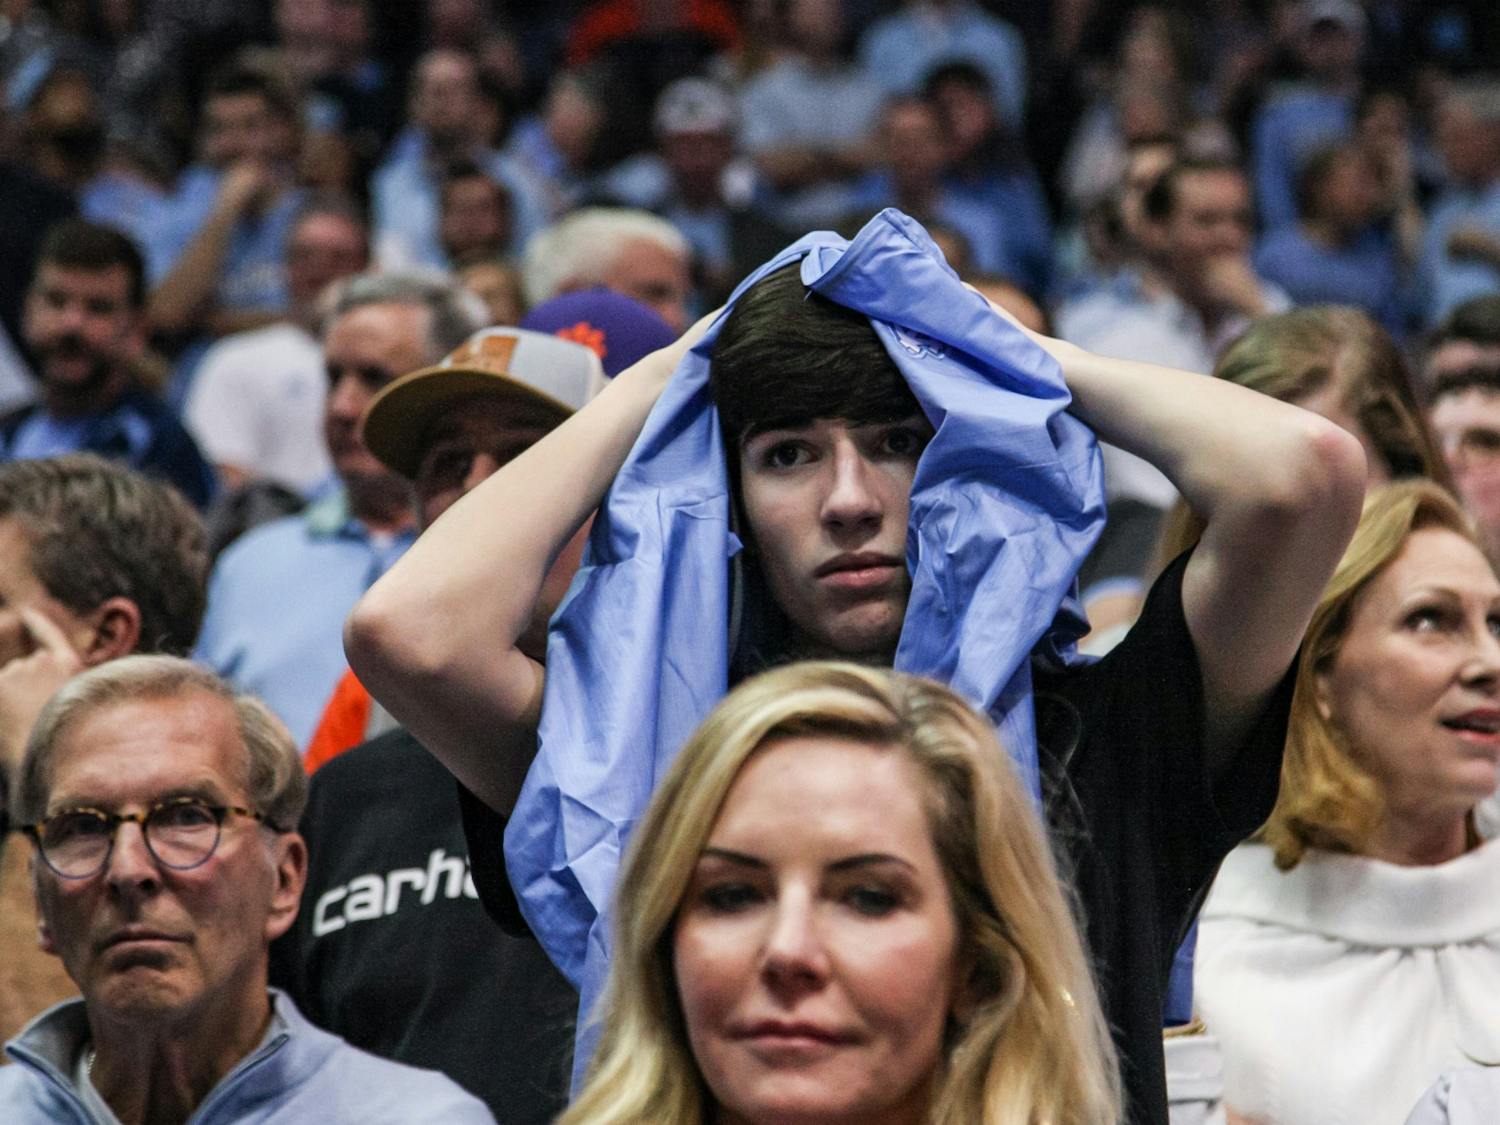 Fans reacts to UNC's loss to Clemson during a game at the Dean Smith Center on Saturday, Jan. 11, 2020. Clemson defeated UNC for the first time in Chapel Hill 79-76.